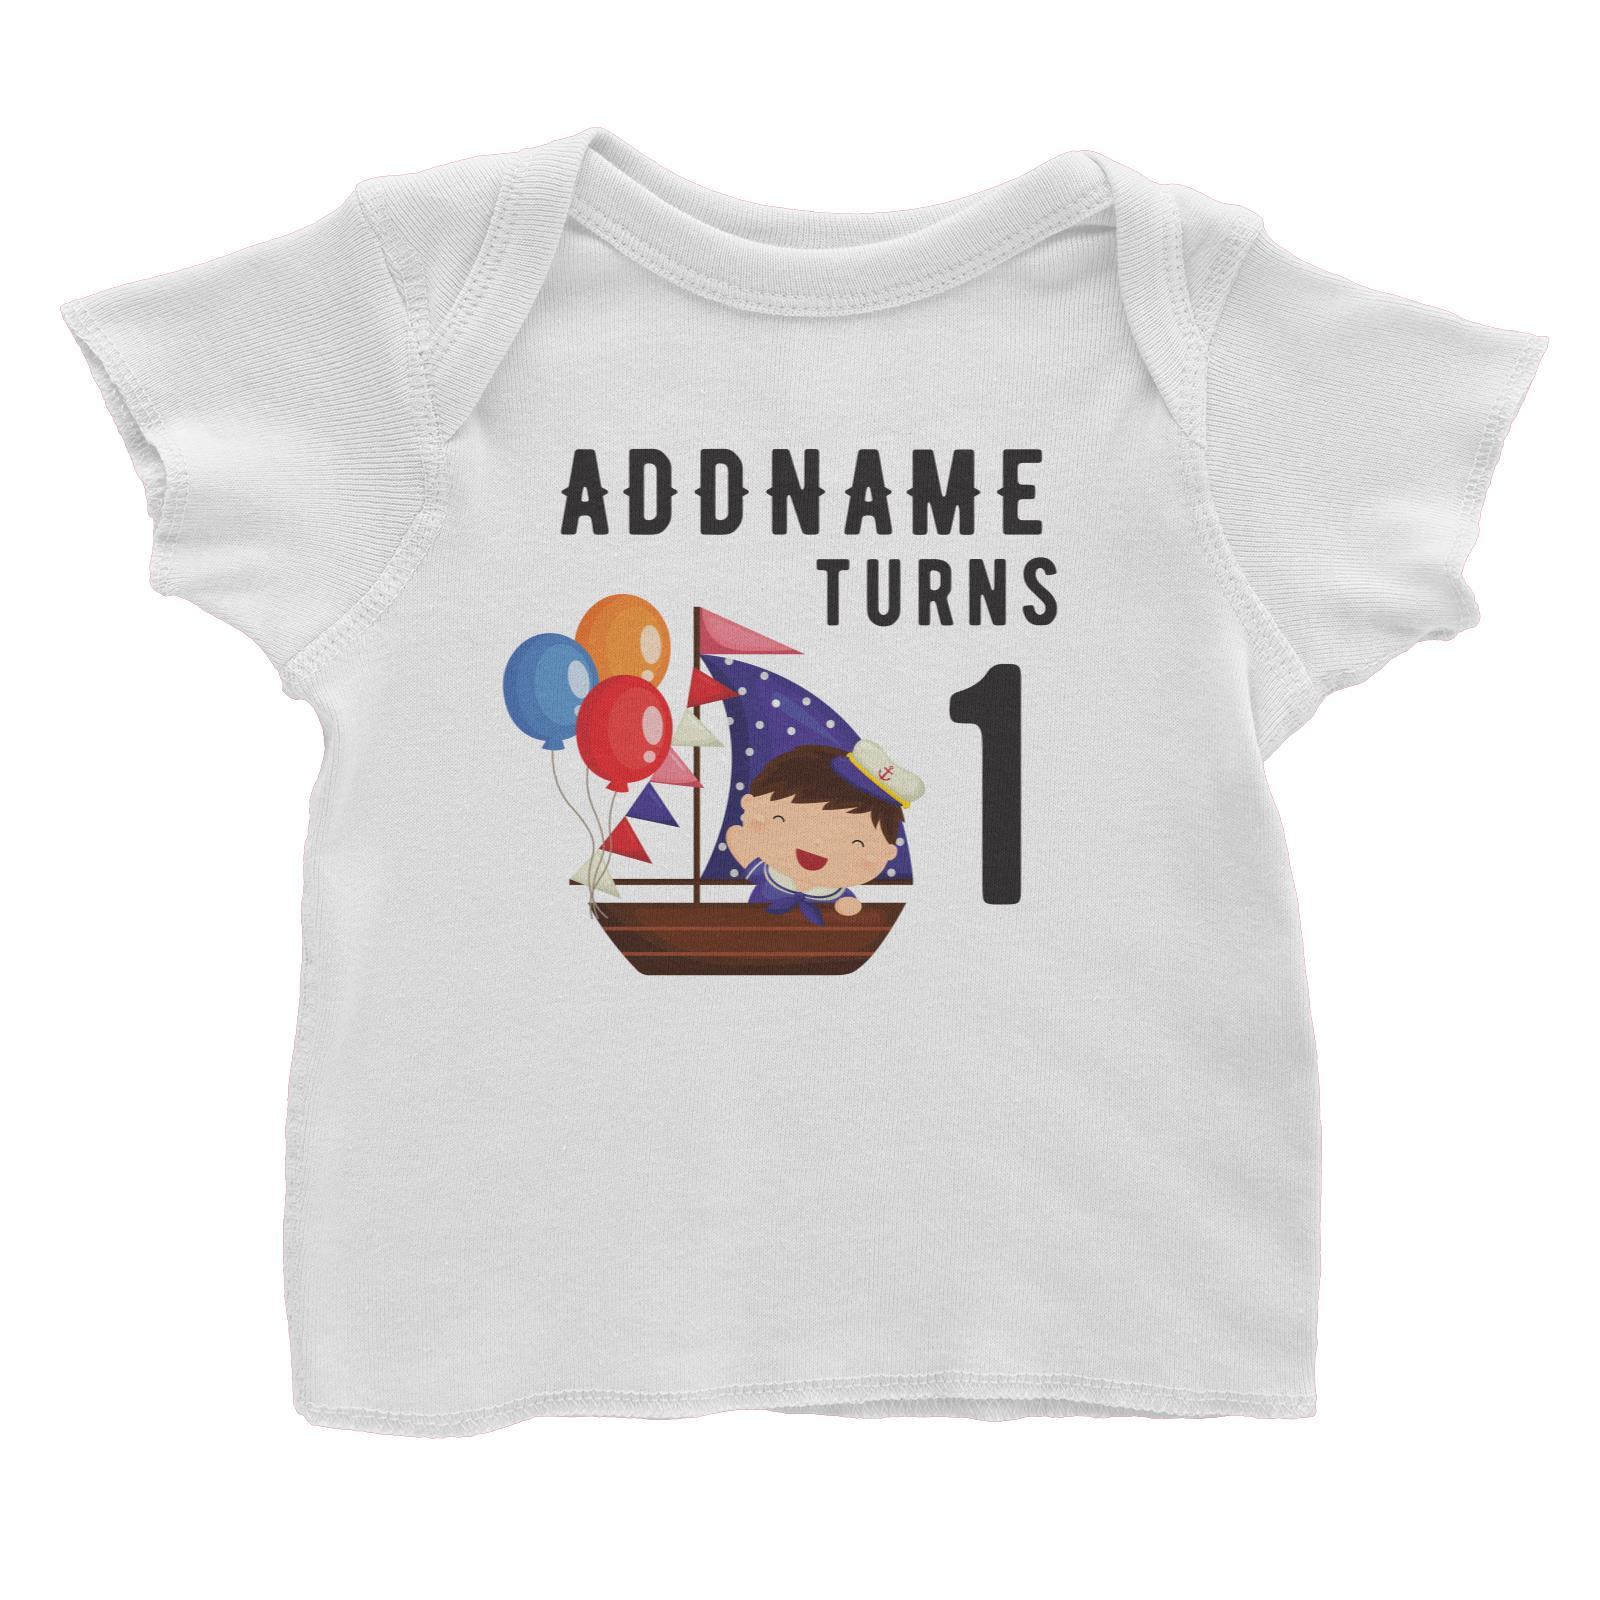 Birthday Sailor Baby Boy In Ship With Balloon Addname Turns 1 Baby T-Shirt